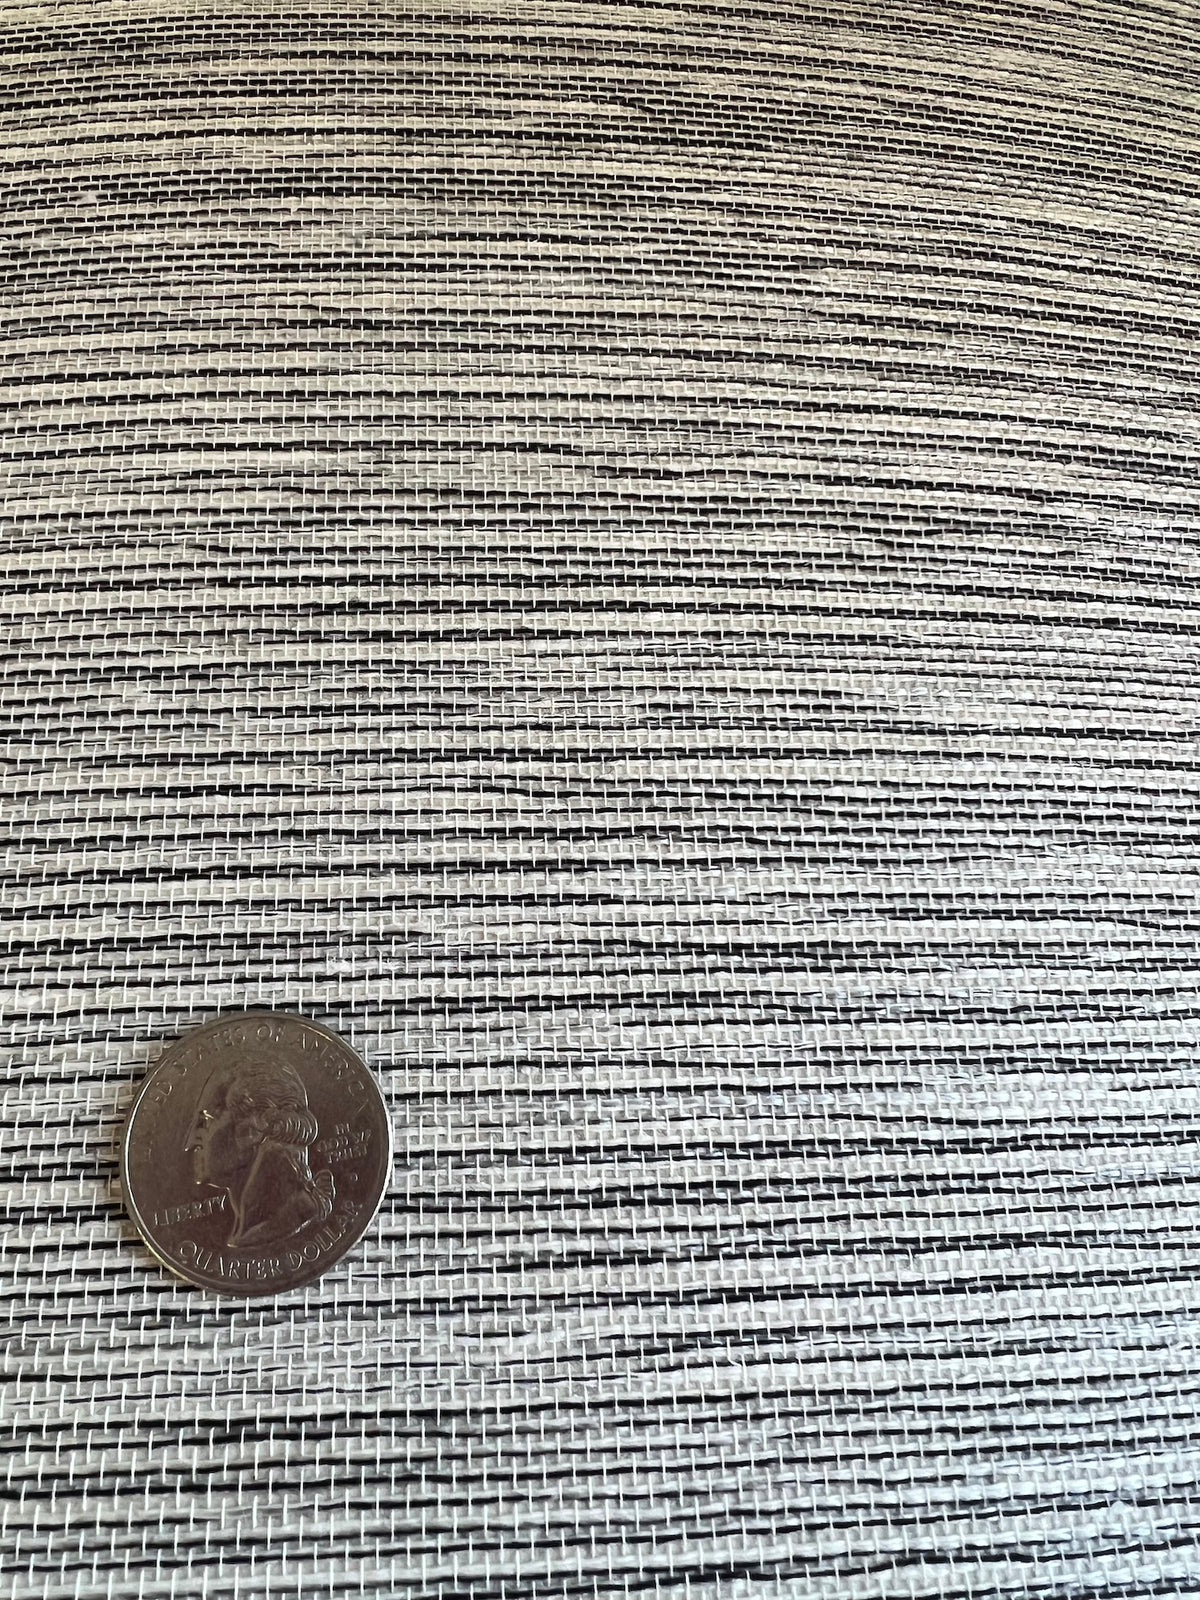 black and white grasscloth wallpaper with a quarter on top